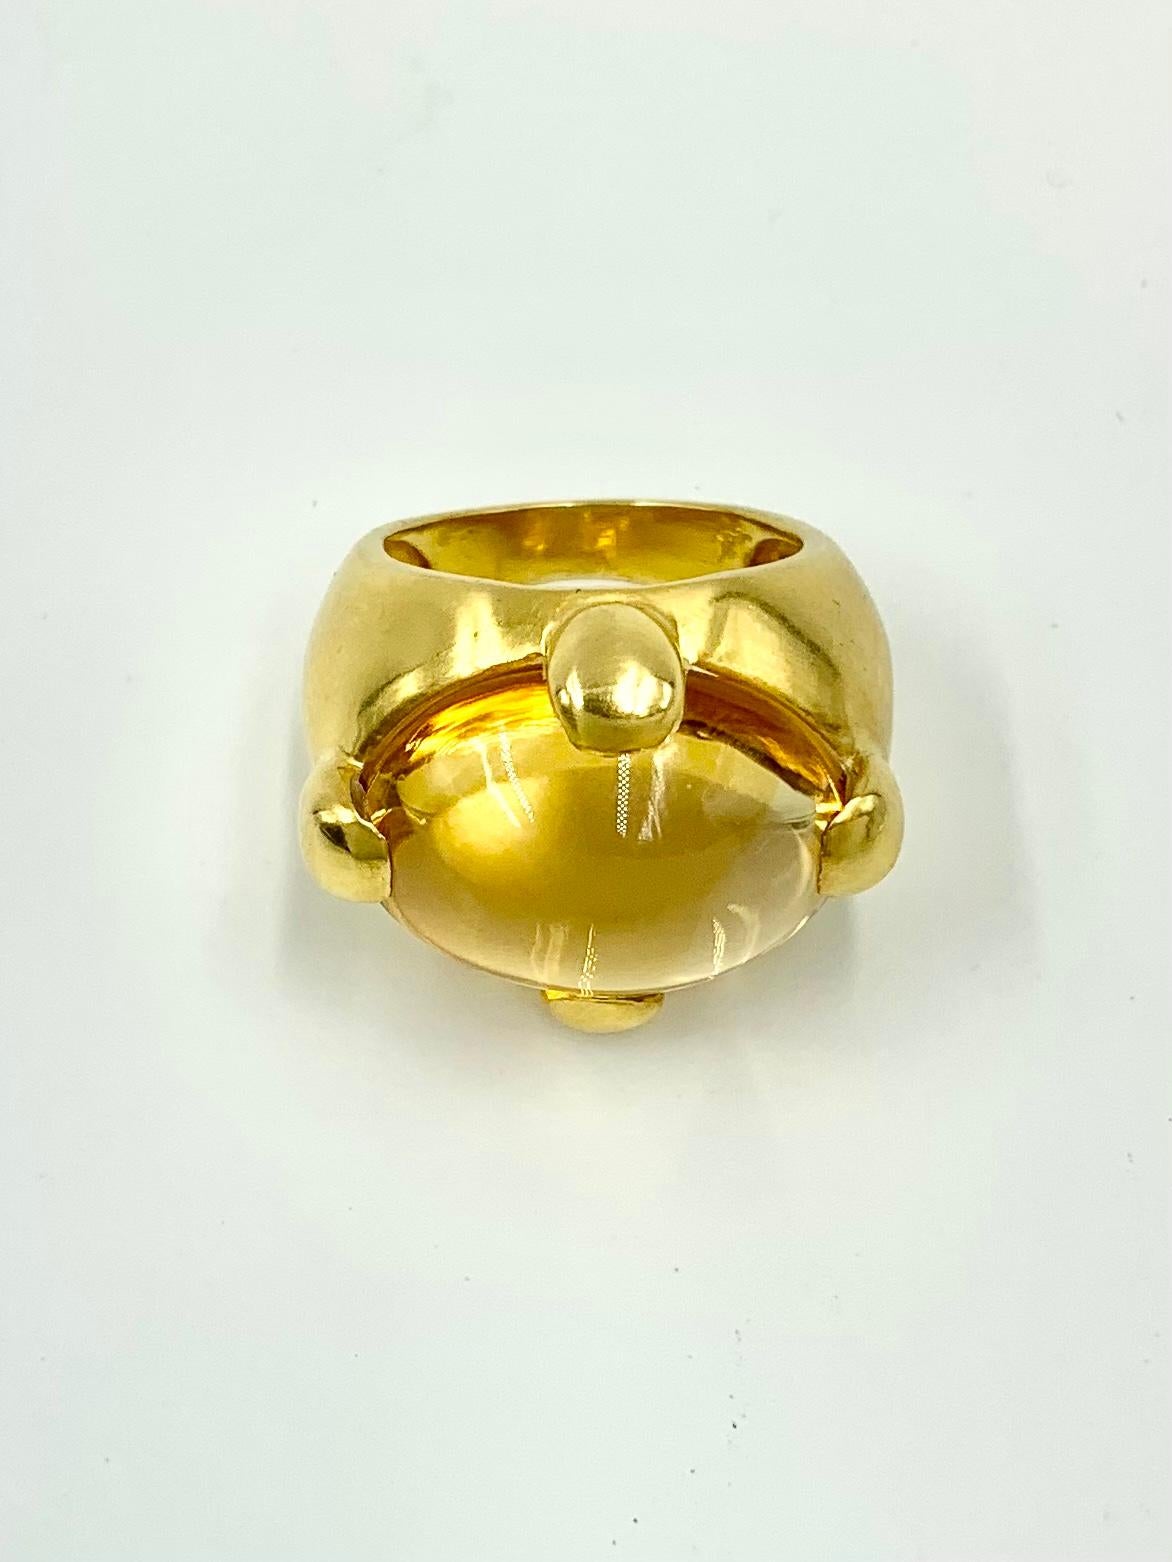 Estate sourced elegant Pomellato Griffe 9.5 Carat Golden Citrine 18K yellow gold ring.
Size 6US
Very good condition
Marks: 18K, partial Pomellato signature on the interior
Citrine is golden yellow, clean, lively, 17mm by 13mm by 6mm